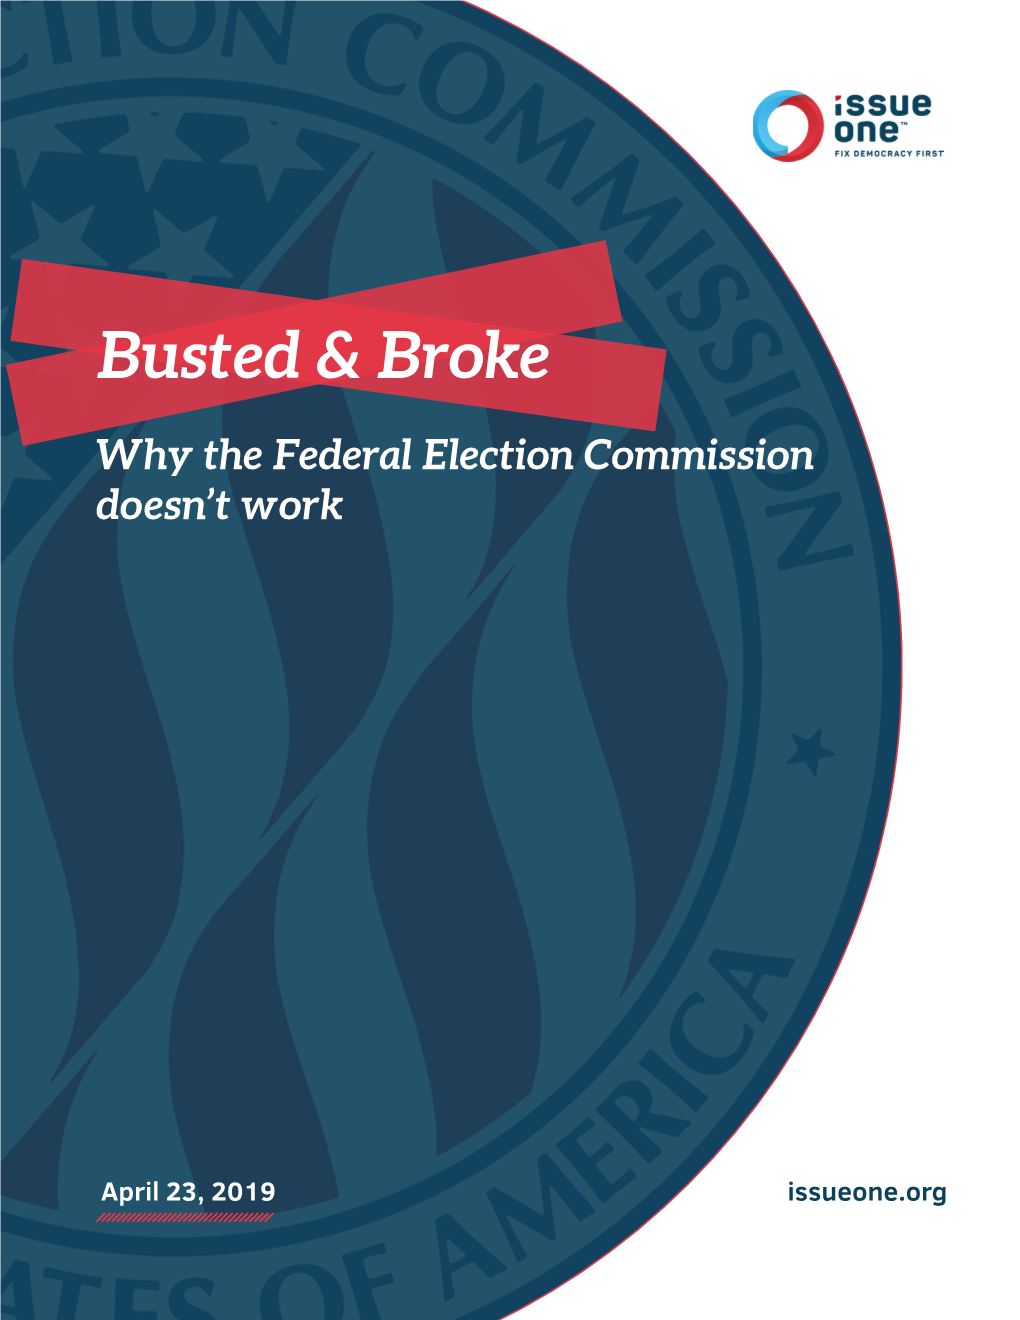 Busted & Broke: Why the Federal Election Commission